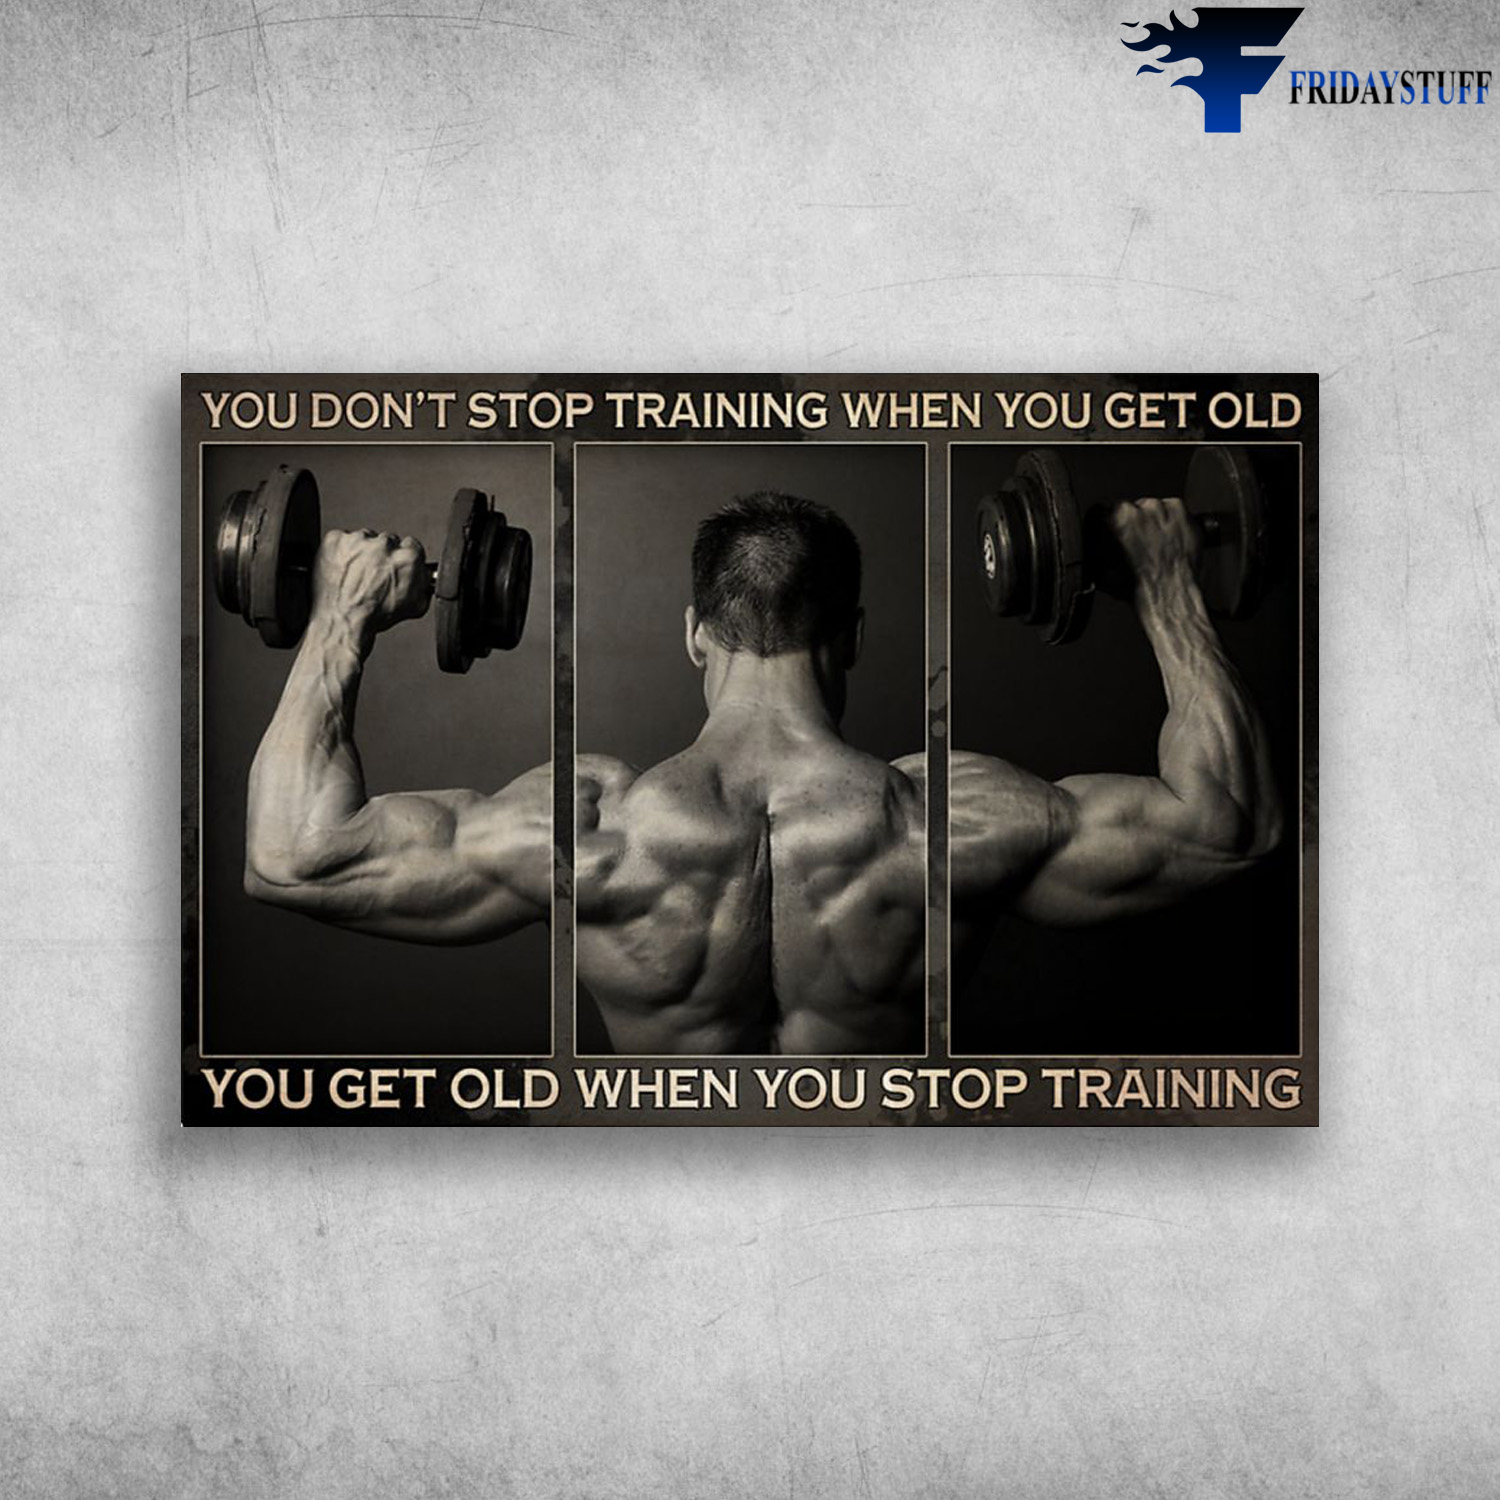 Dumbbell Man - You Don't Stop Training When You Get Old, You Get Old When You Stop Training